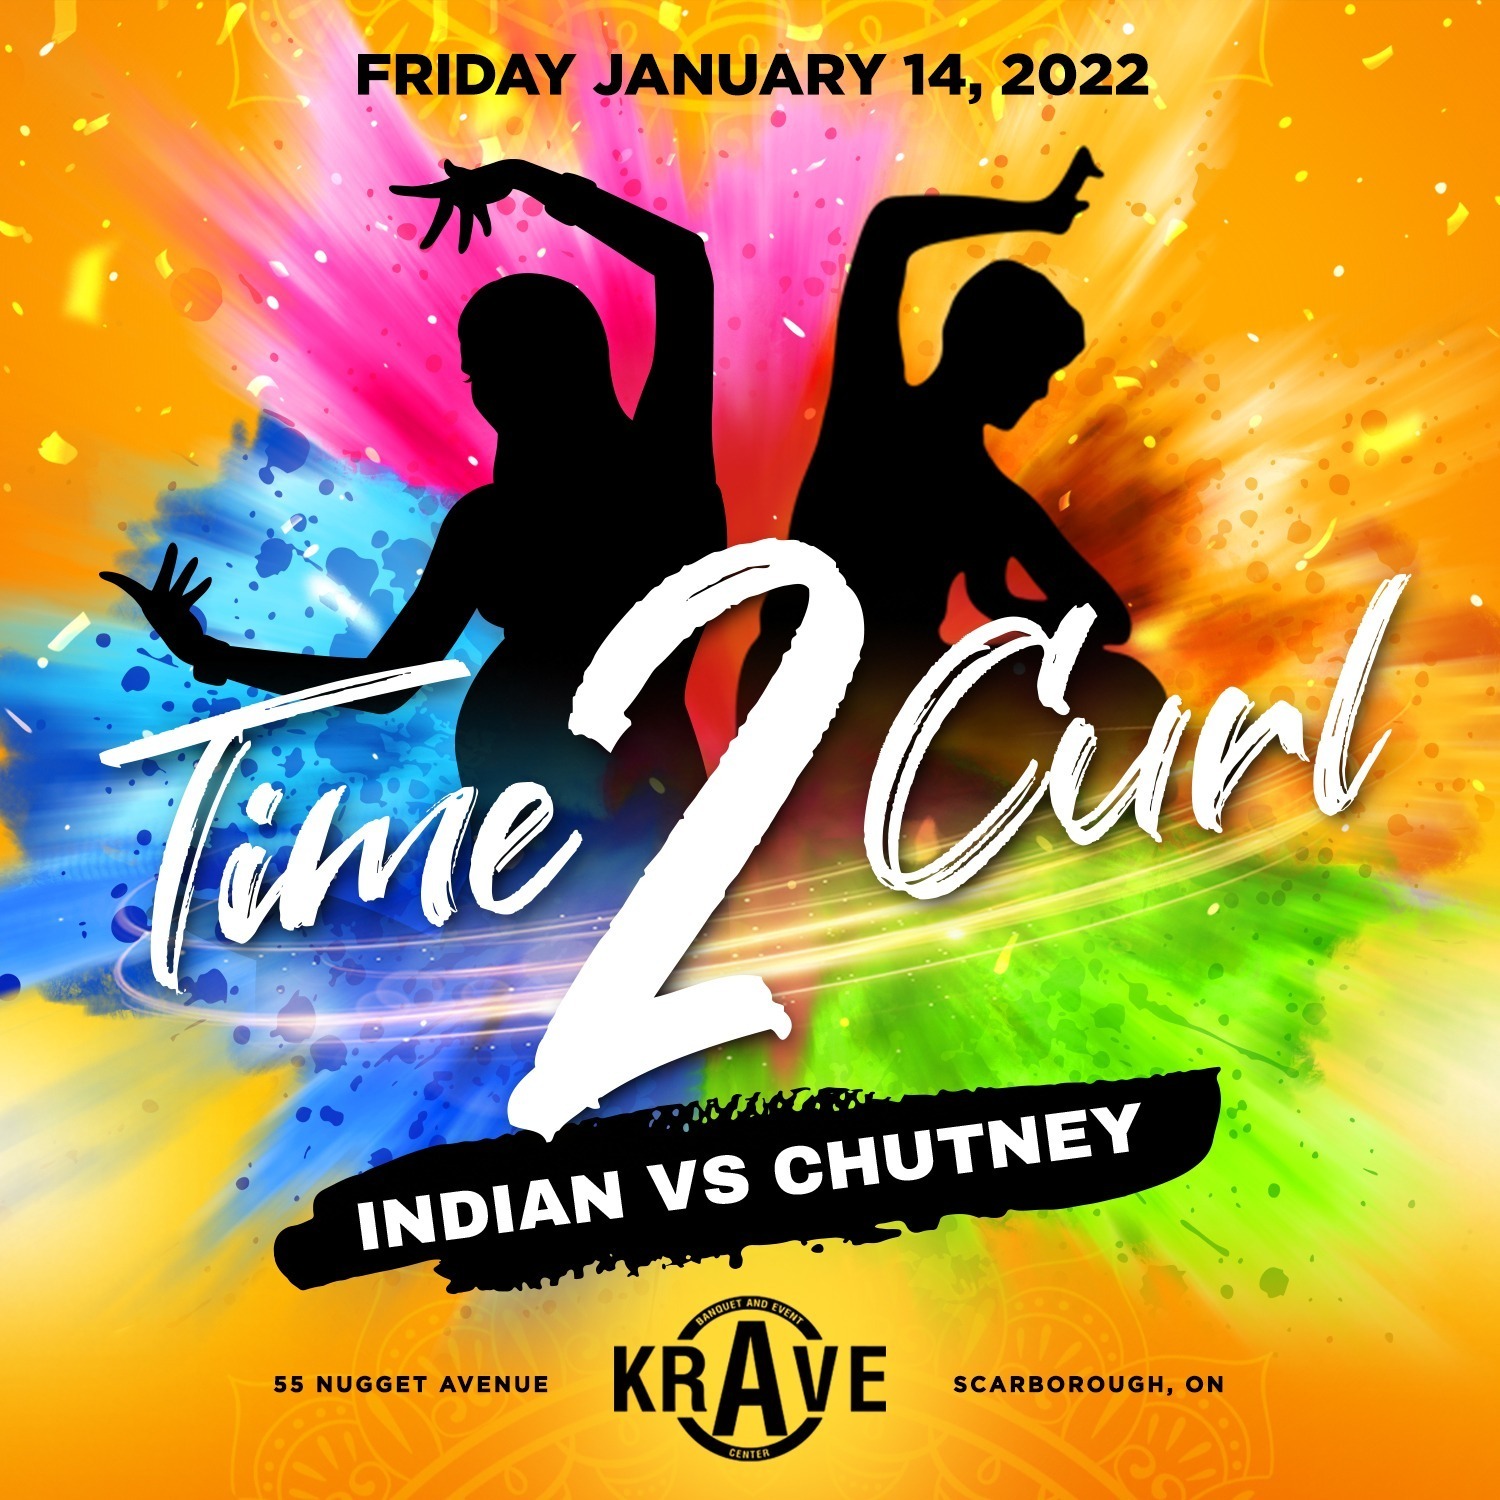 TIME 2 CURL - INDIAN VS CHUTNEY